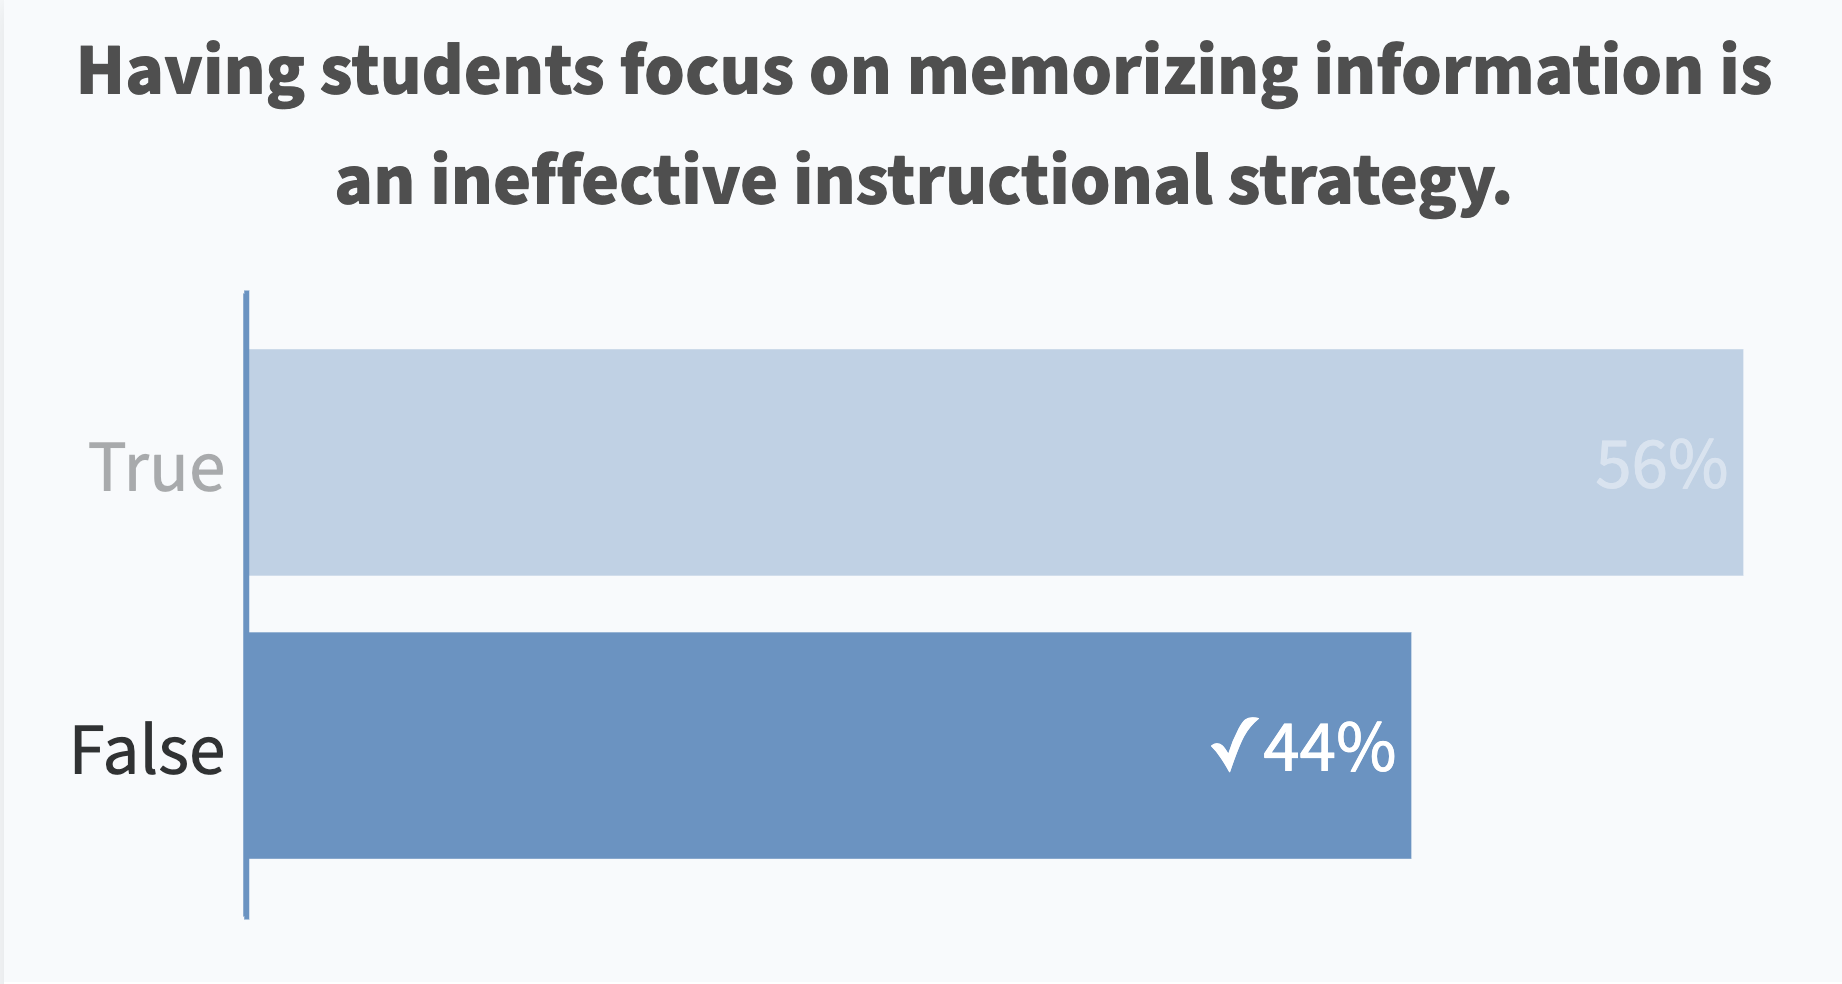 Having students focus on memorizing information is an ineffective instructional strategy. (False: 44% correct)